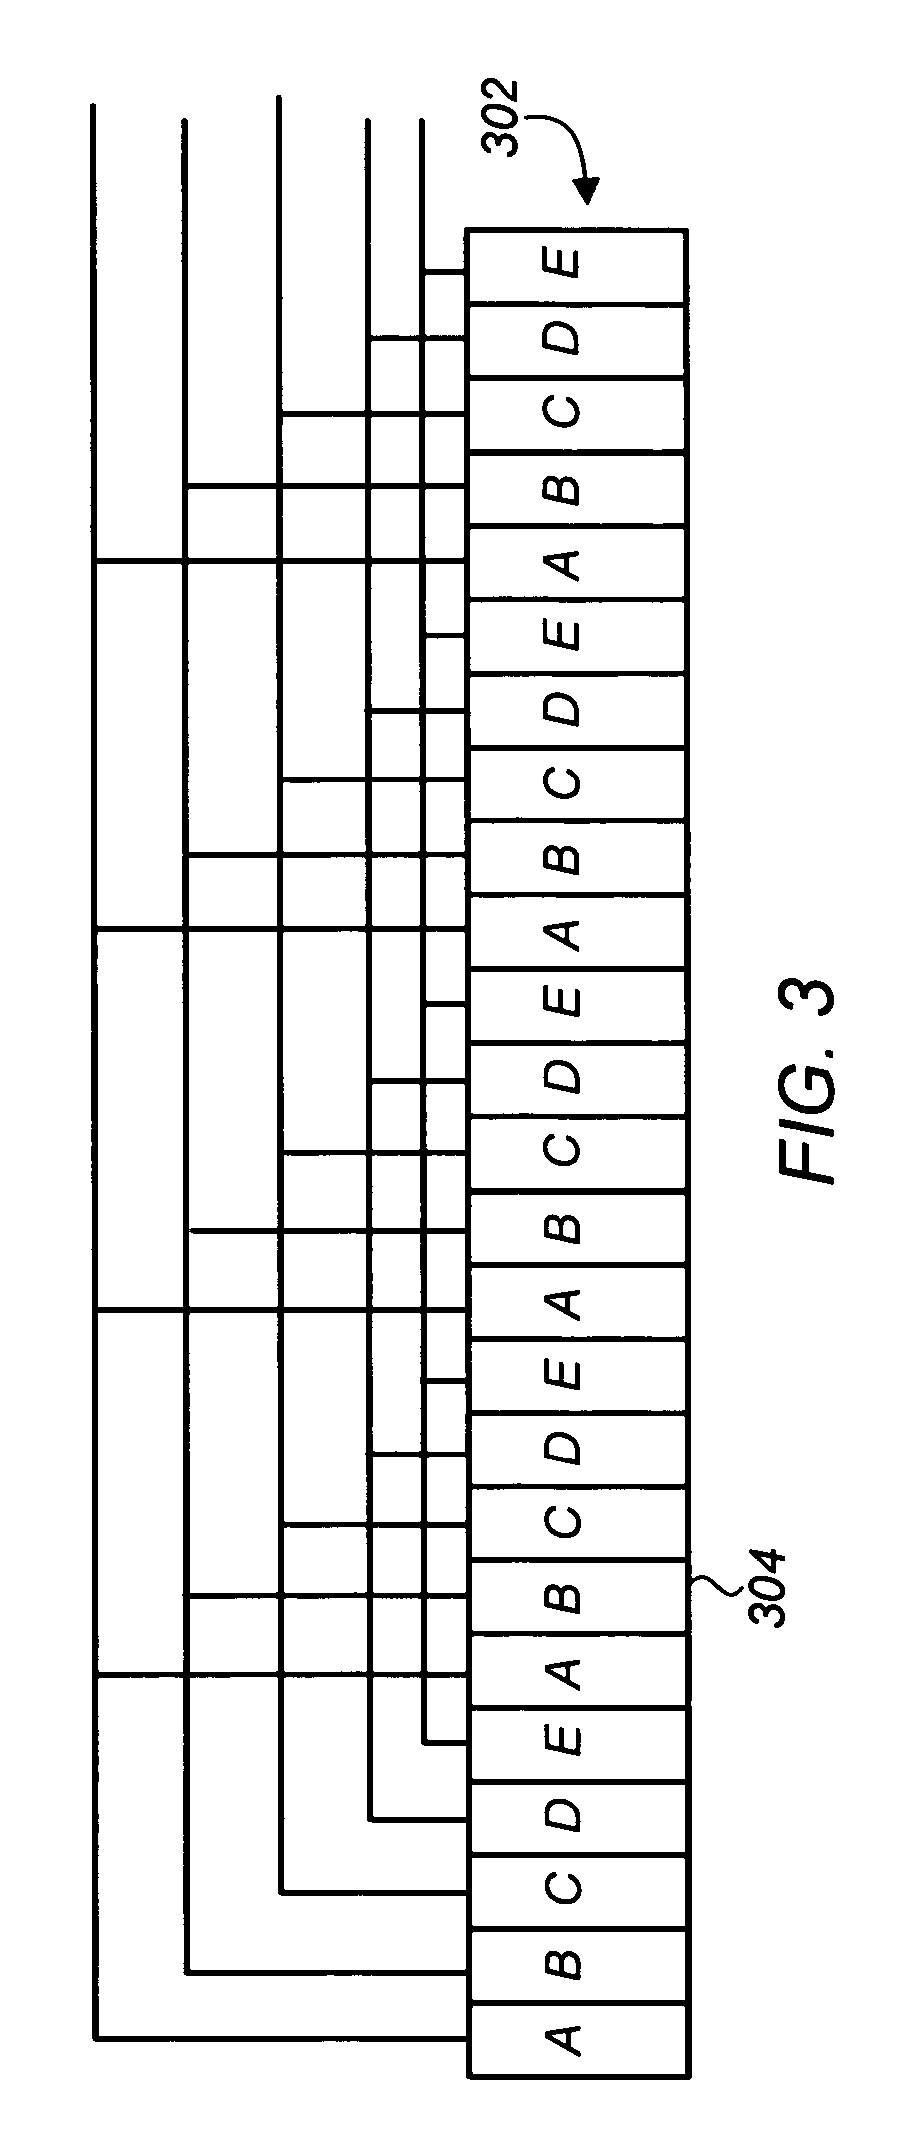 Signal processing method for use with an optical navigation system